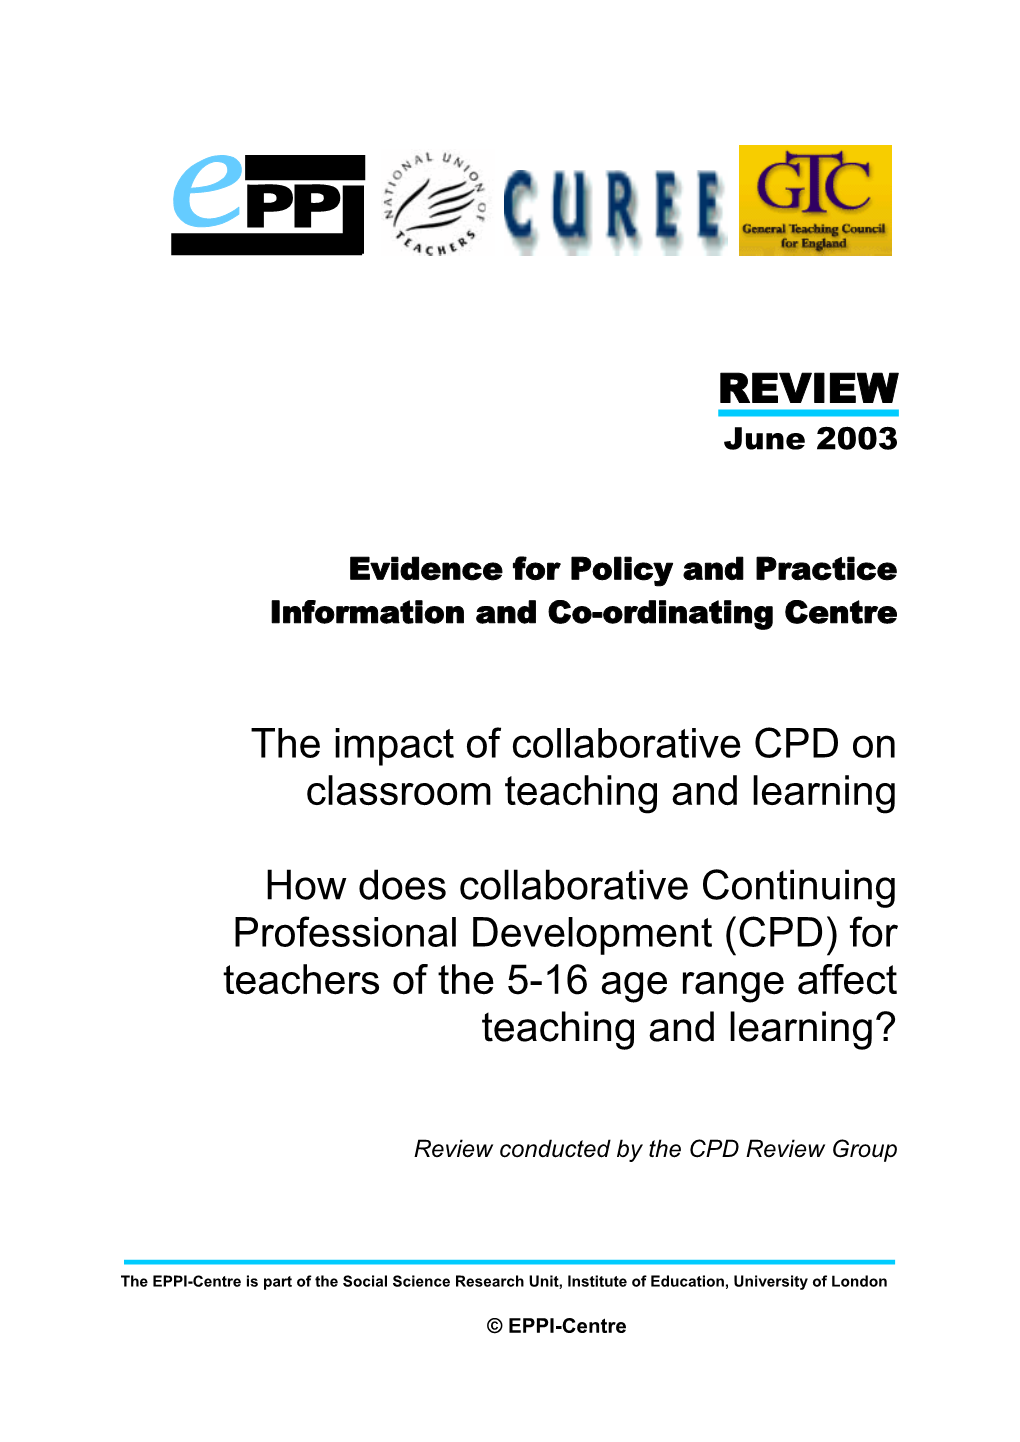 How Does Collaborative CPD for Teachers of the 5-16 Age Range Affect Teaching and Learning?